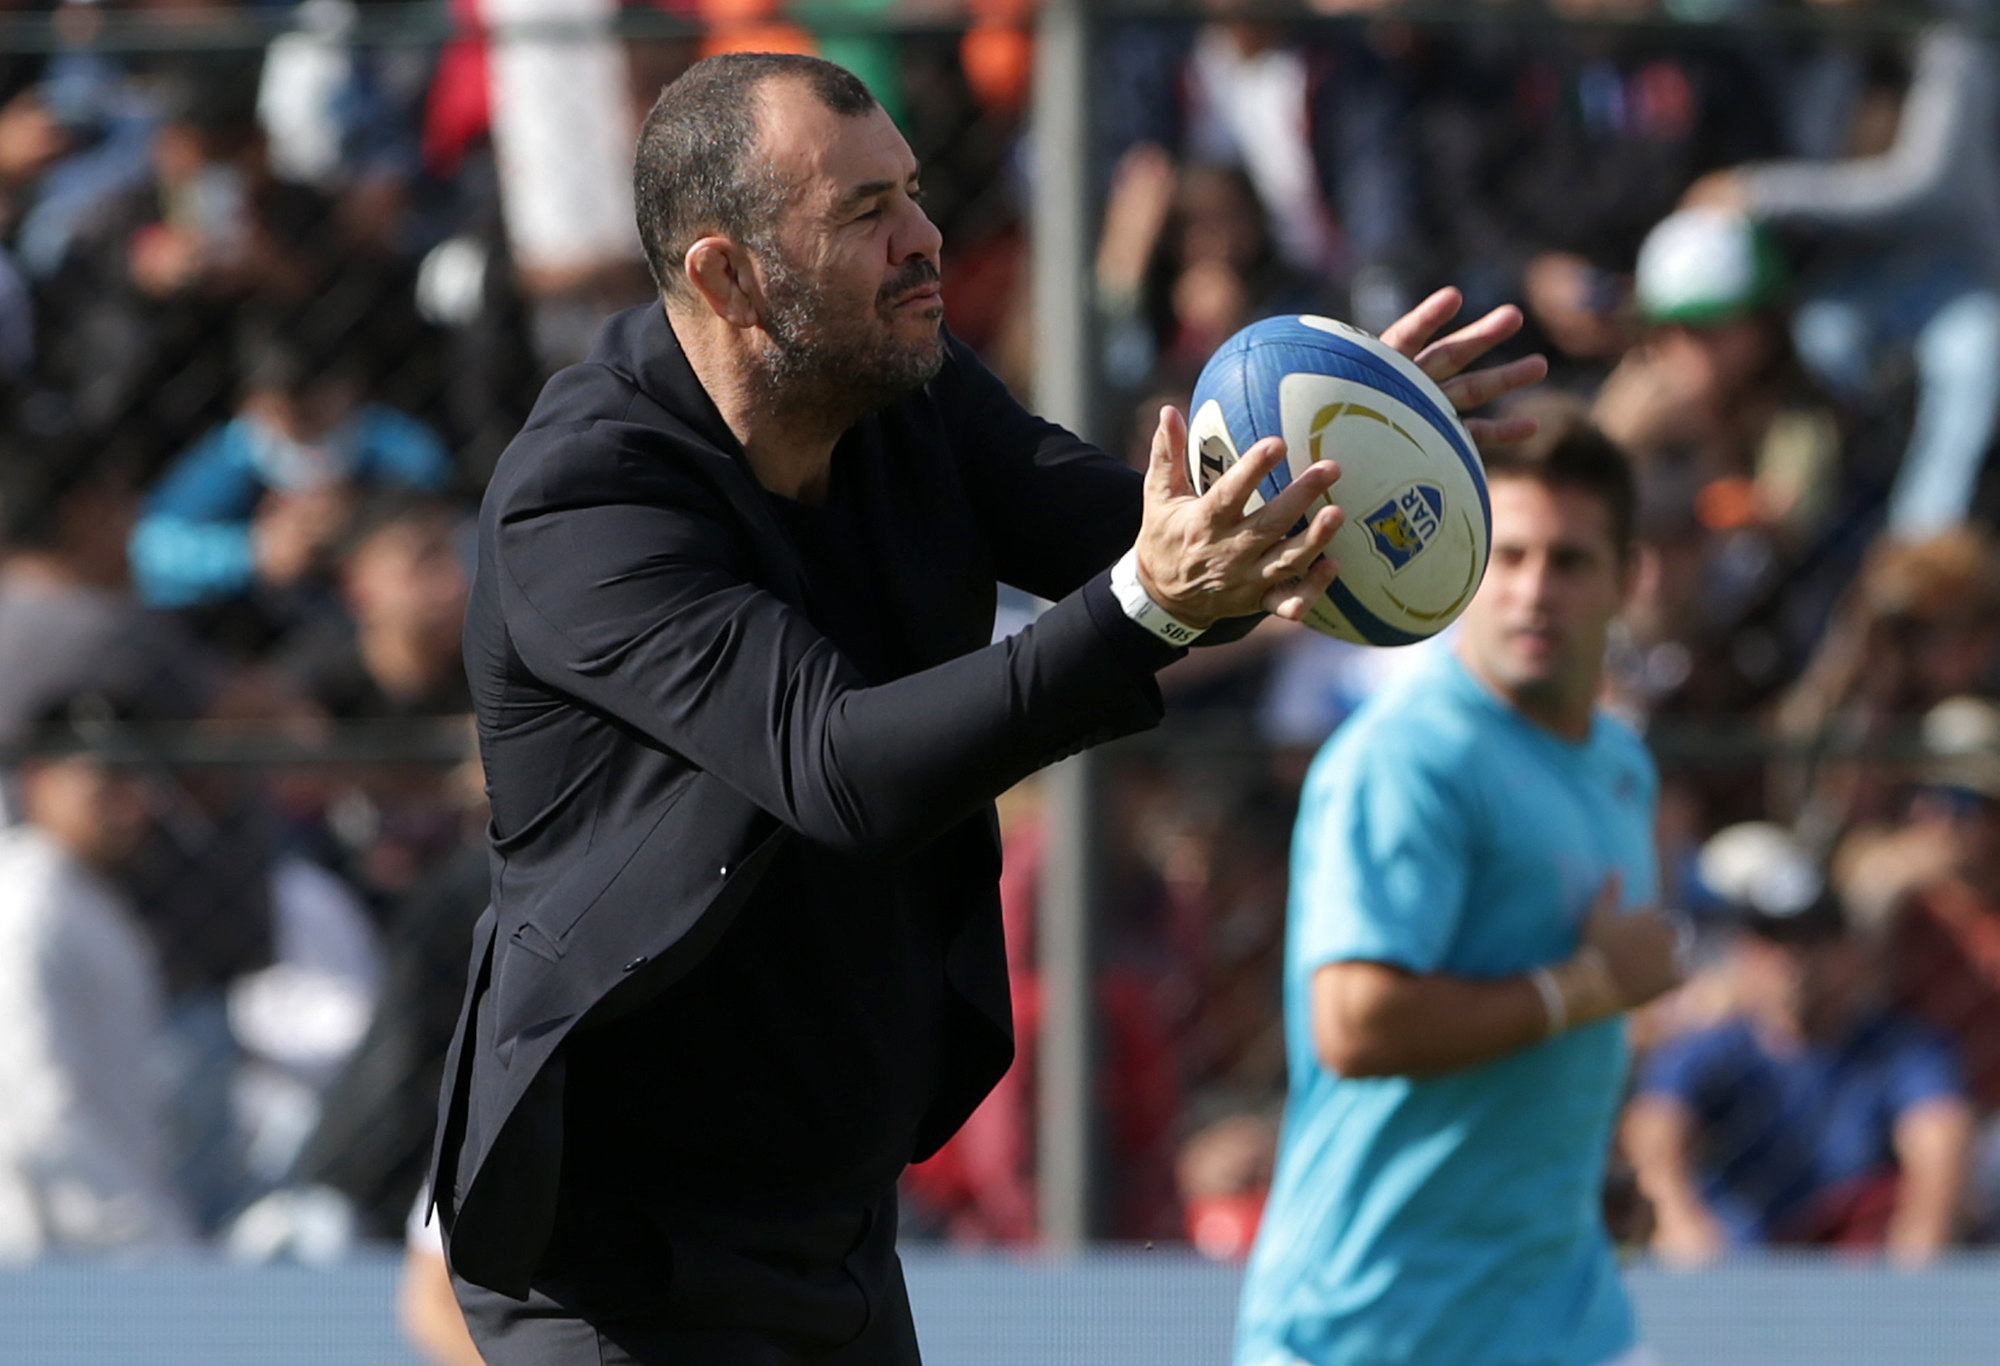 Michael Cheika, head coach of Argentina, catches the ball.